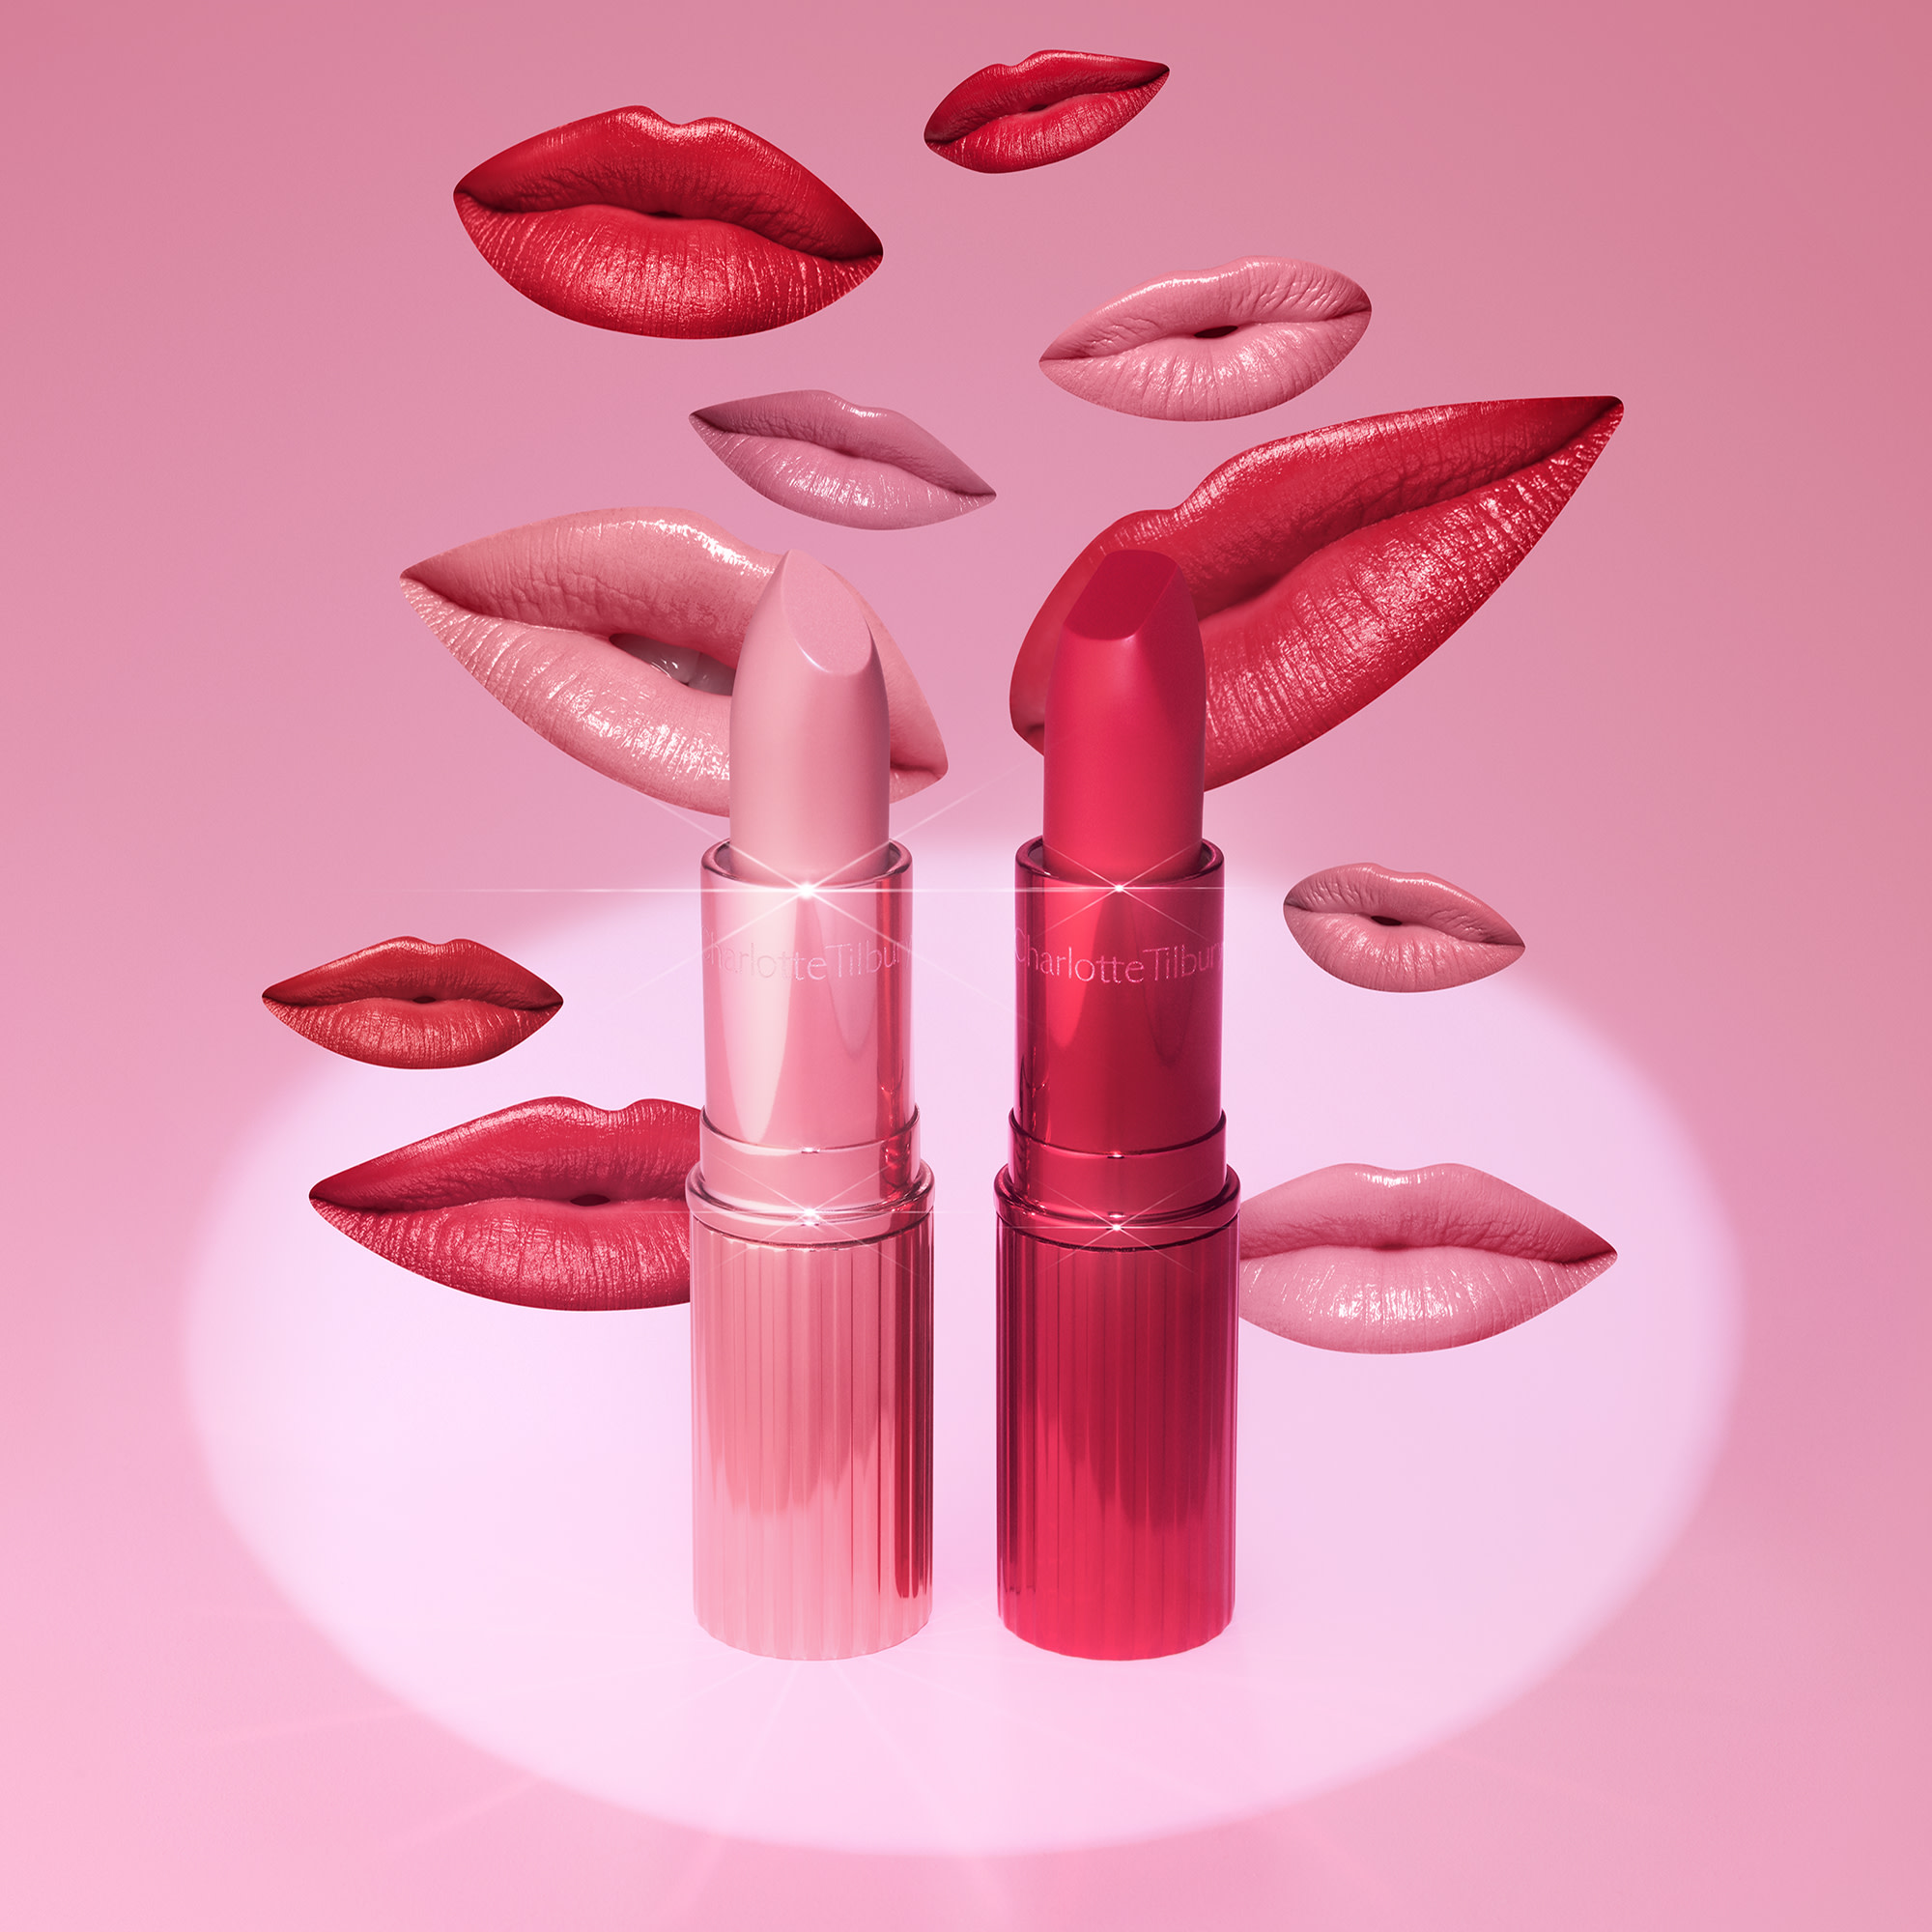 Pink and red Valentine's Day lipstick ideas from Charlotte Tilbury